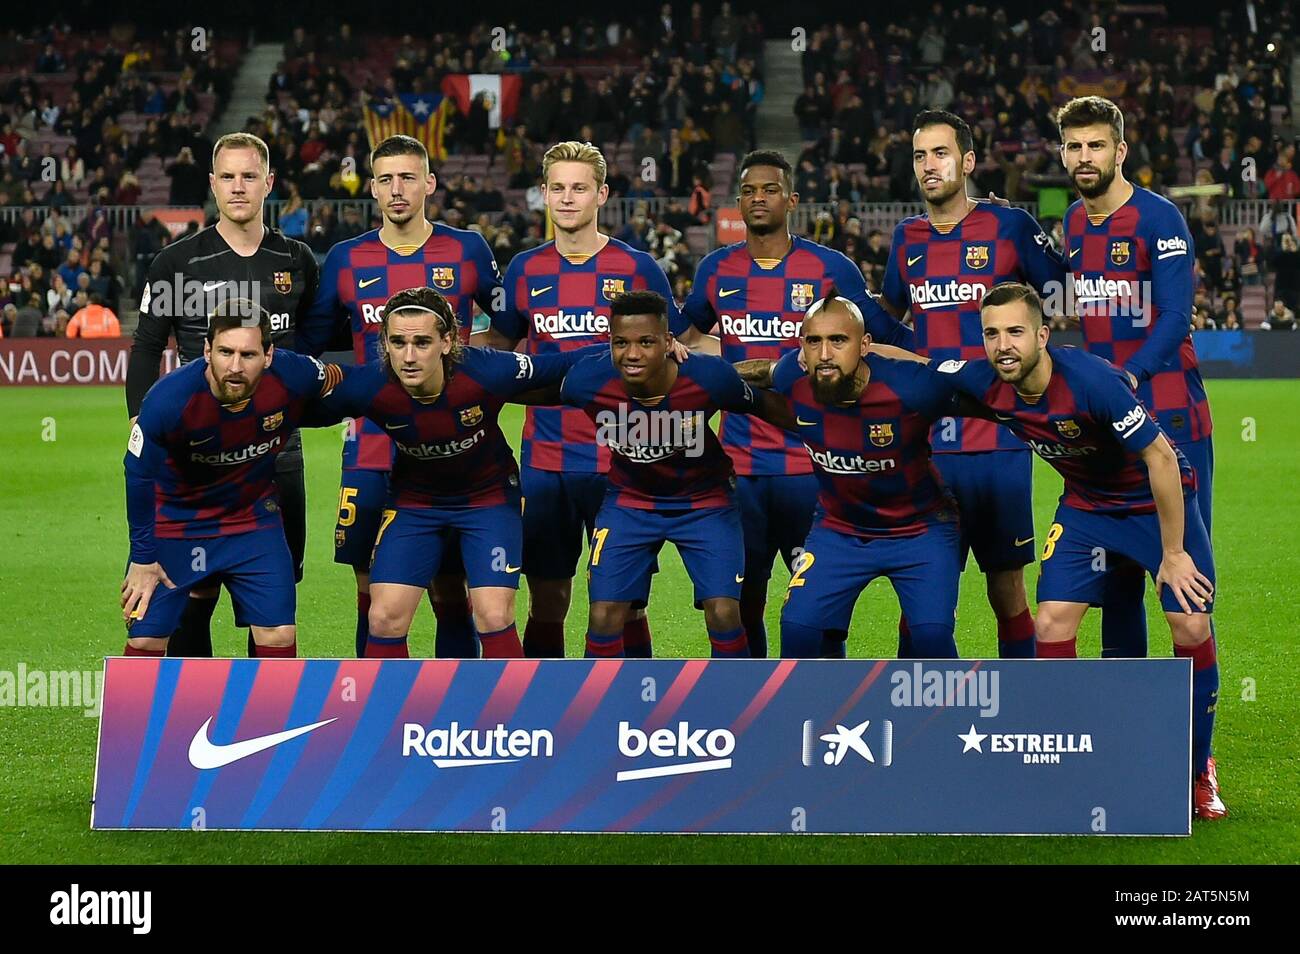 Barcelona, Spain. 30th Jan, 2020. BARCELONA, SPAIN - JANUARY 30: The FC  Barcelona team line up for a photo prior to kick offduring the Spanish Copa  del Rey Round of 16 match